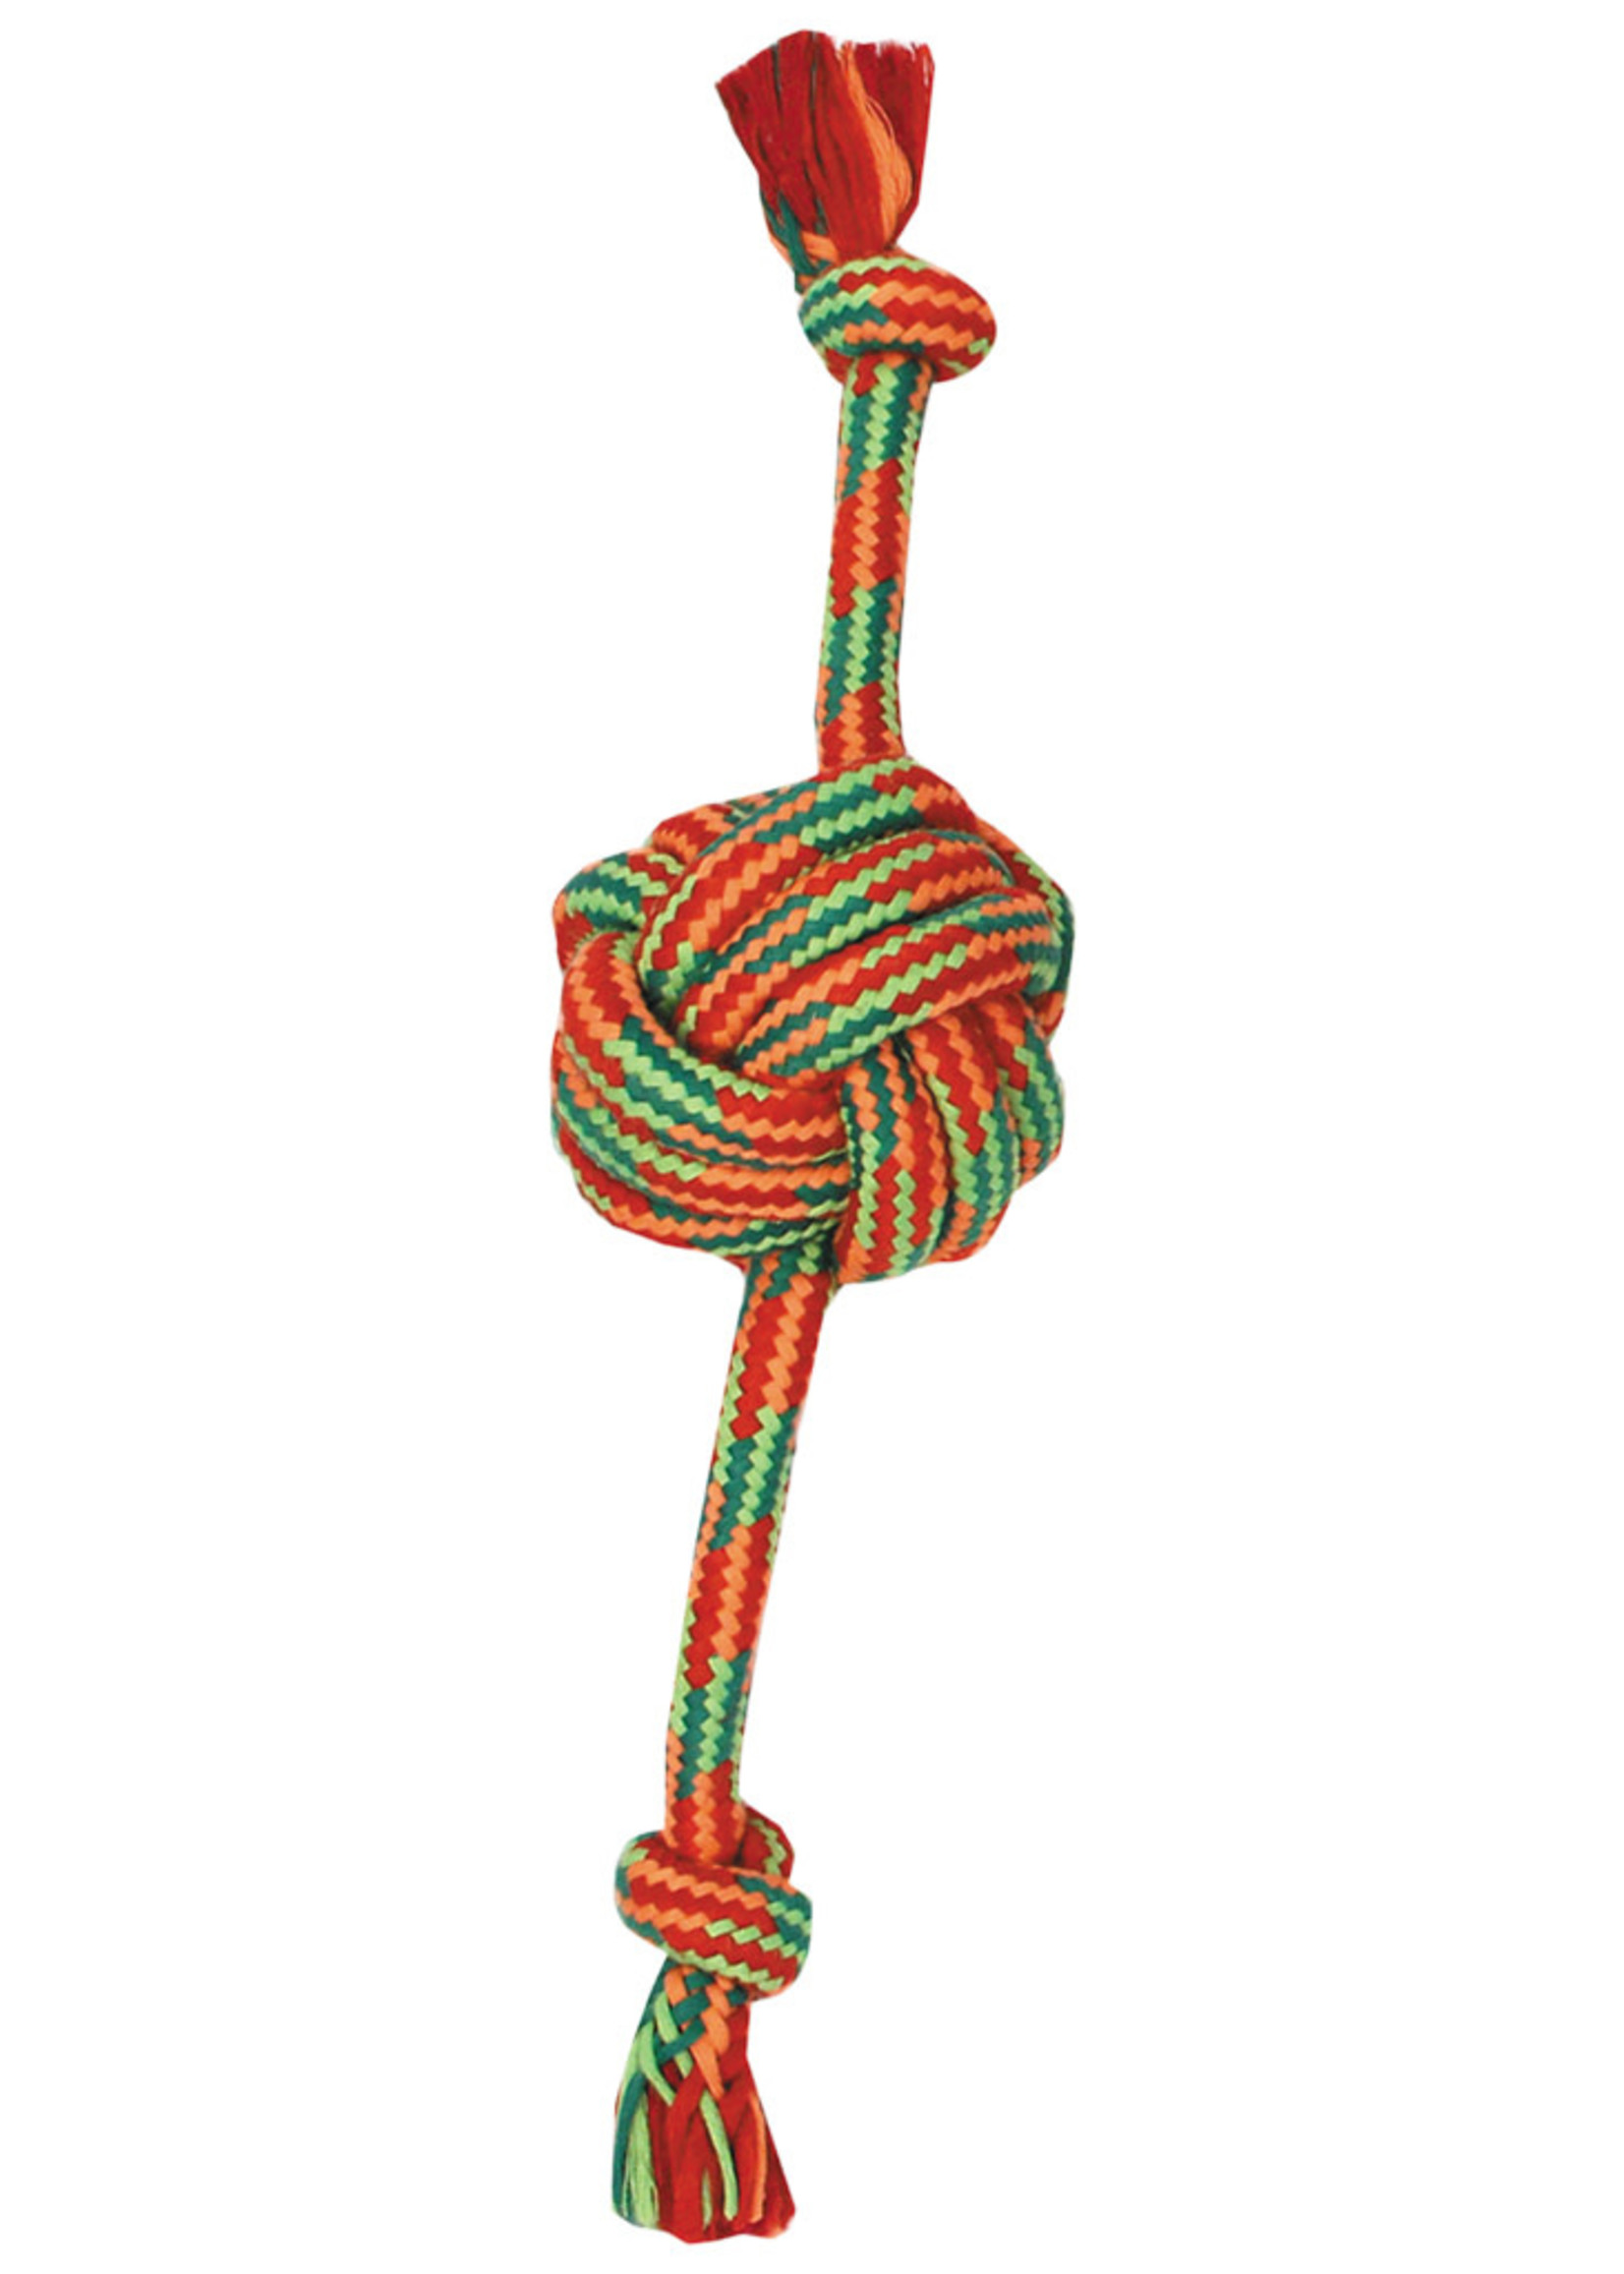 Extra Monkey Fist Ball w/Rope Ends Small 13